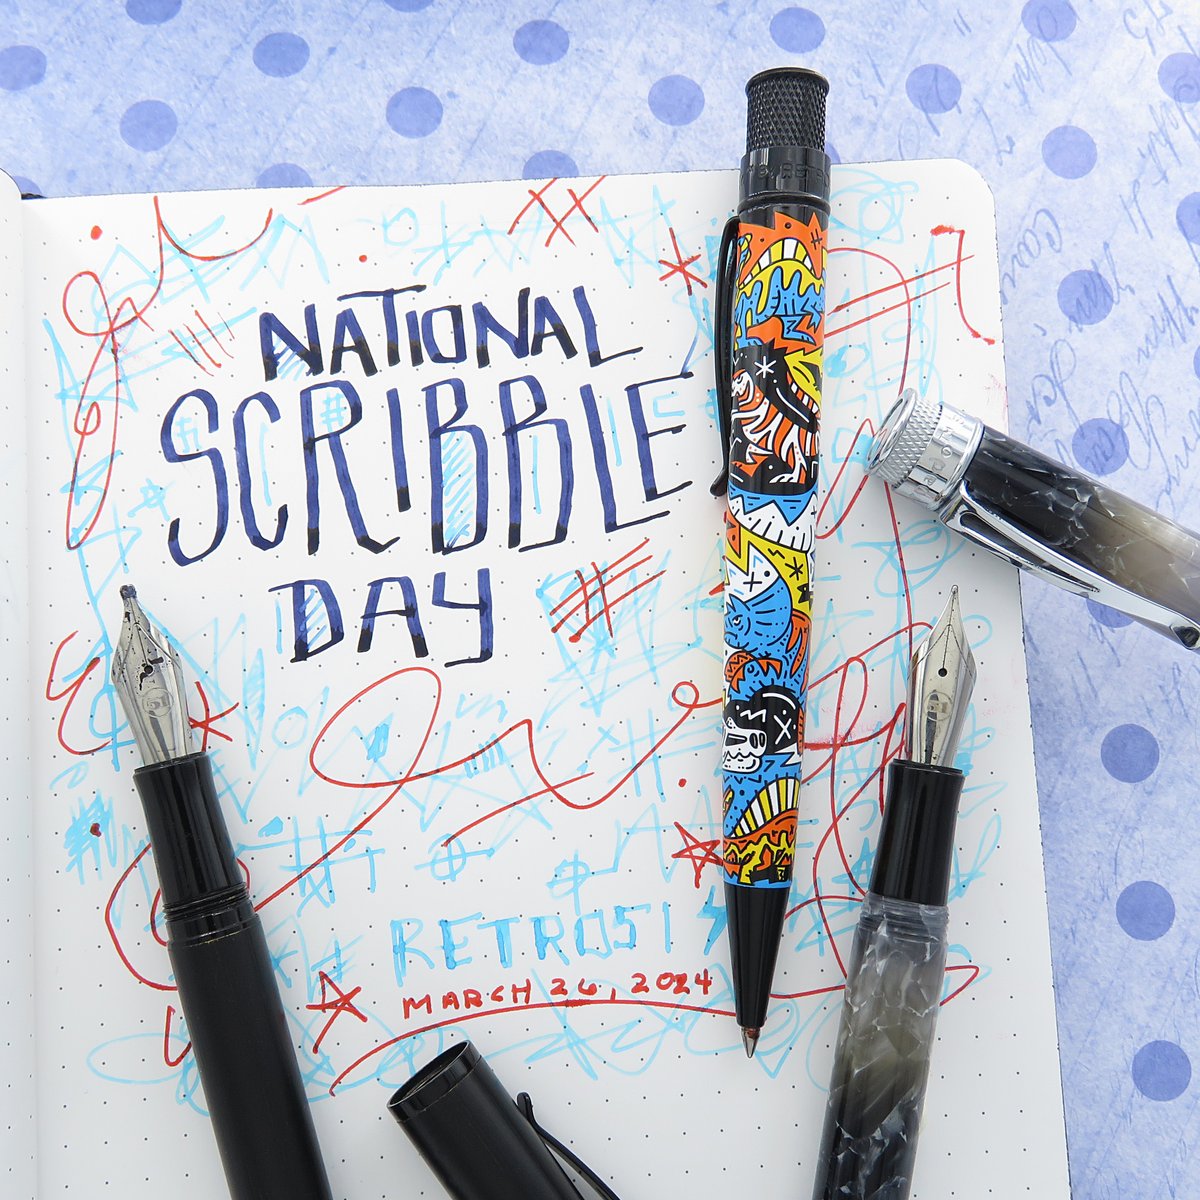 Today is National Scribble Day. It feels good to just let loose and let the ink fly all over the page with no inhibitions. Try it out today. . . #scribbleday #penaddict #retro51 #fpgeeks